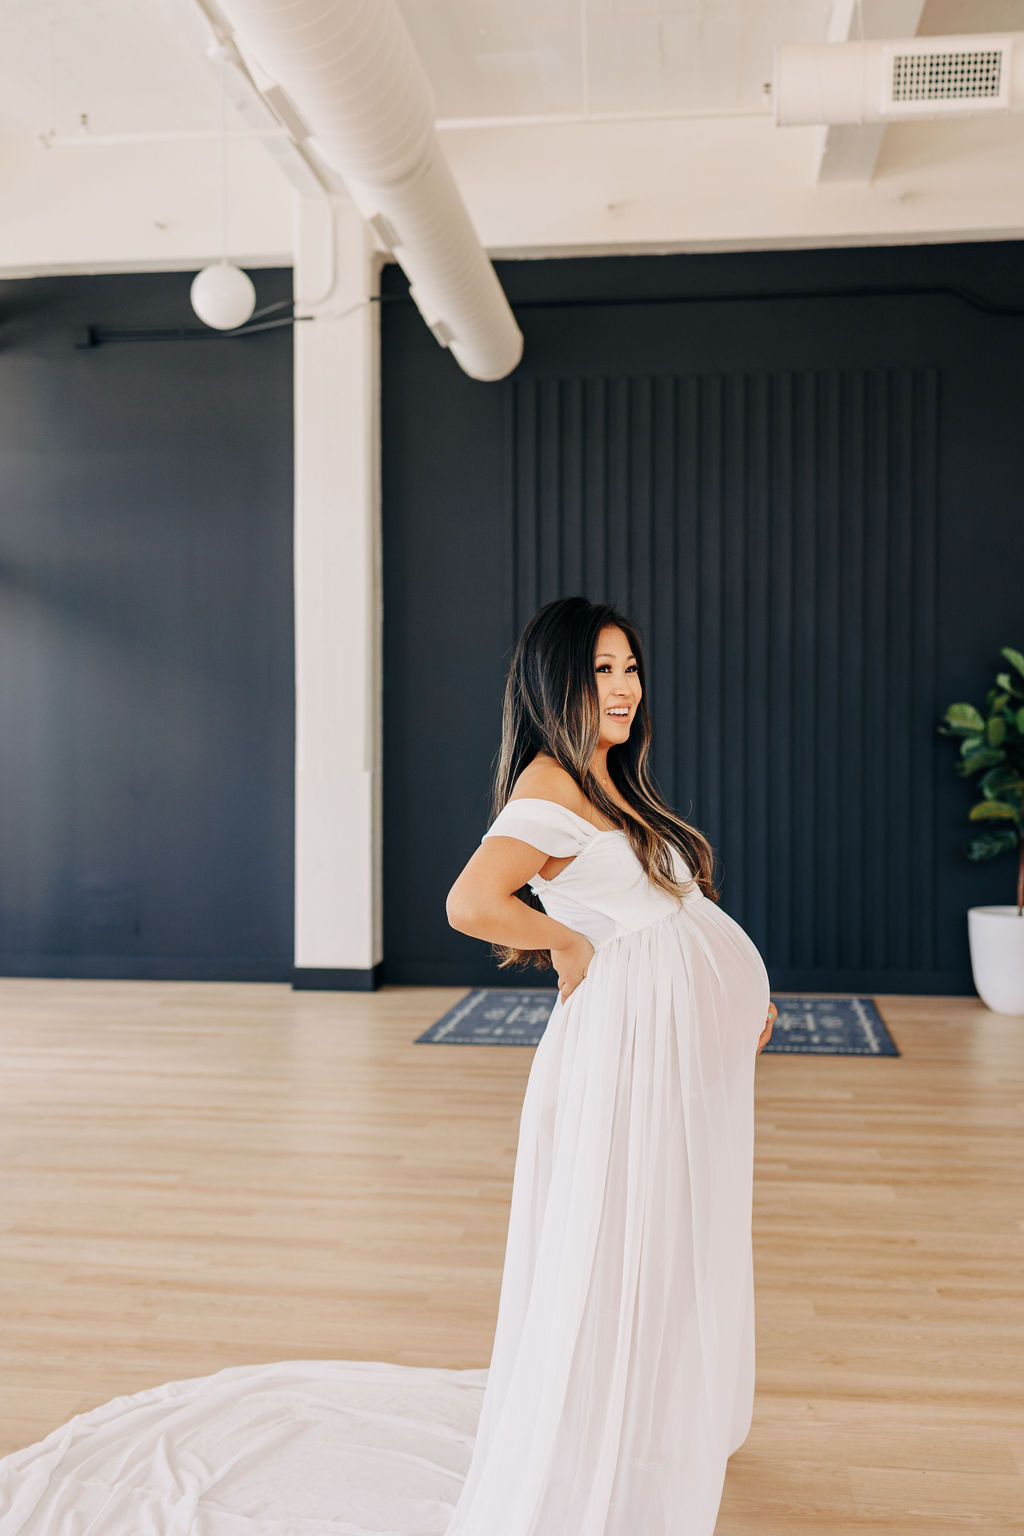 A mother to be in a long white maternity gown laughs while standing in a studio with wood floor 